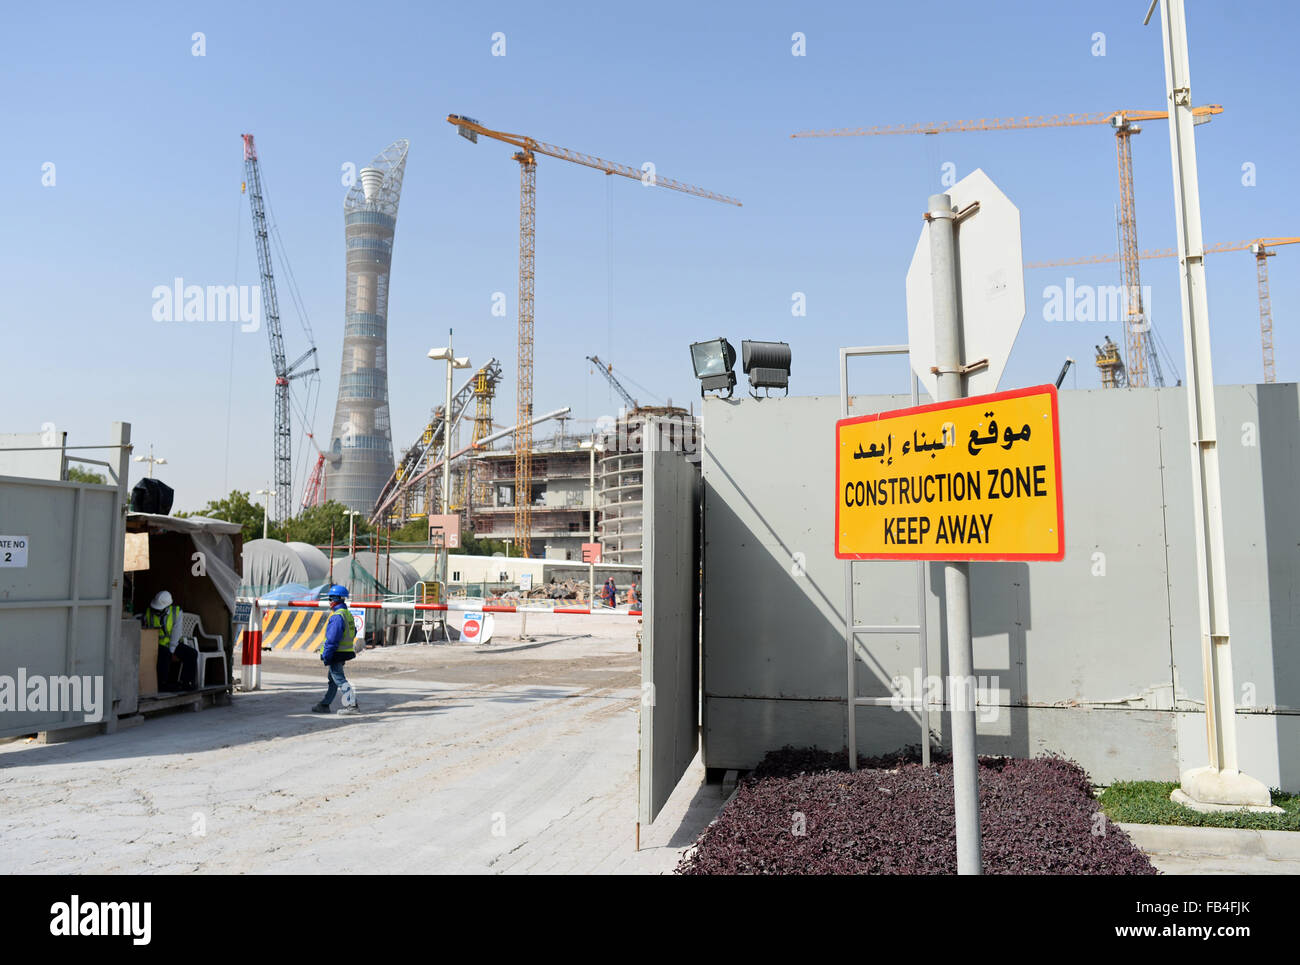 A sign reading "Construction Zone - Keep Away" stands at an entrance to the construction site of the Khalifa International Stadium in Doha, 09 January 2016. The stadium is currently undergoing renovation works. The Khalifa International Stadium is the first proposed host venue for the 2022 FIFA World Cup Qatar. In background is the hotel "The Torch". Photo: Andreas Gebert/dpa Stock Photo